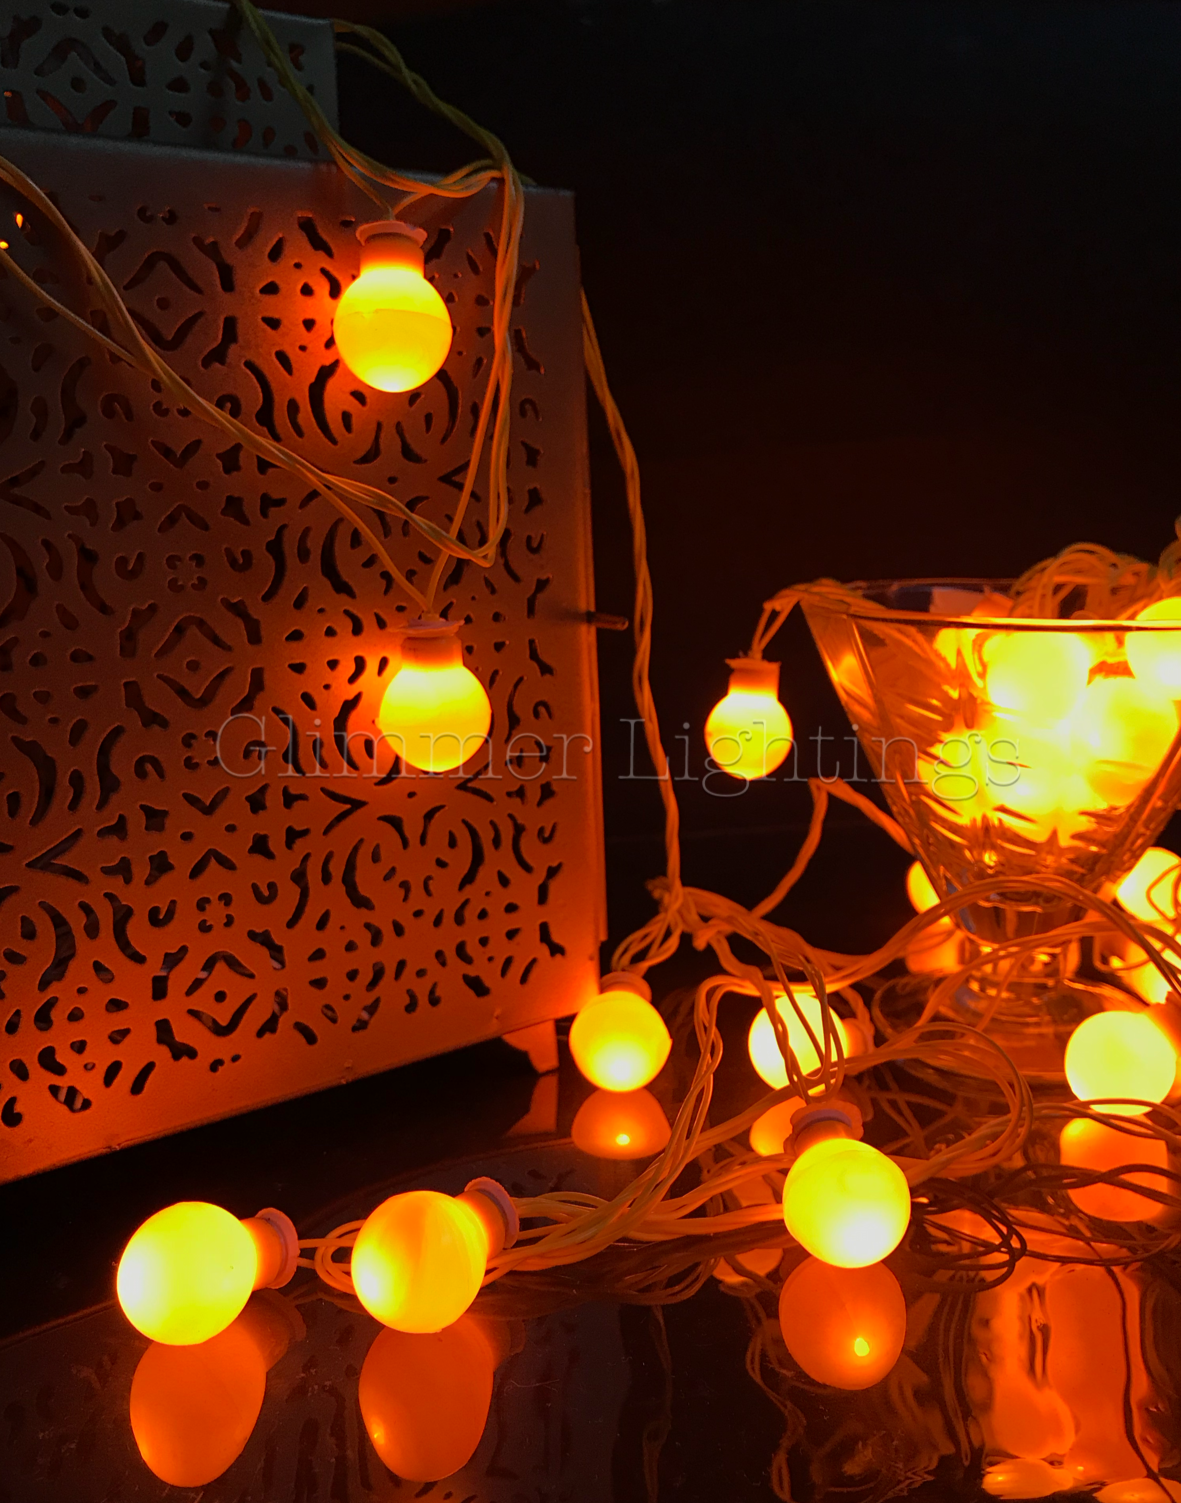 Glimmer Lightings home decoration Elegant ball fairy string lights for Diwali Christmas Party and weddings